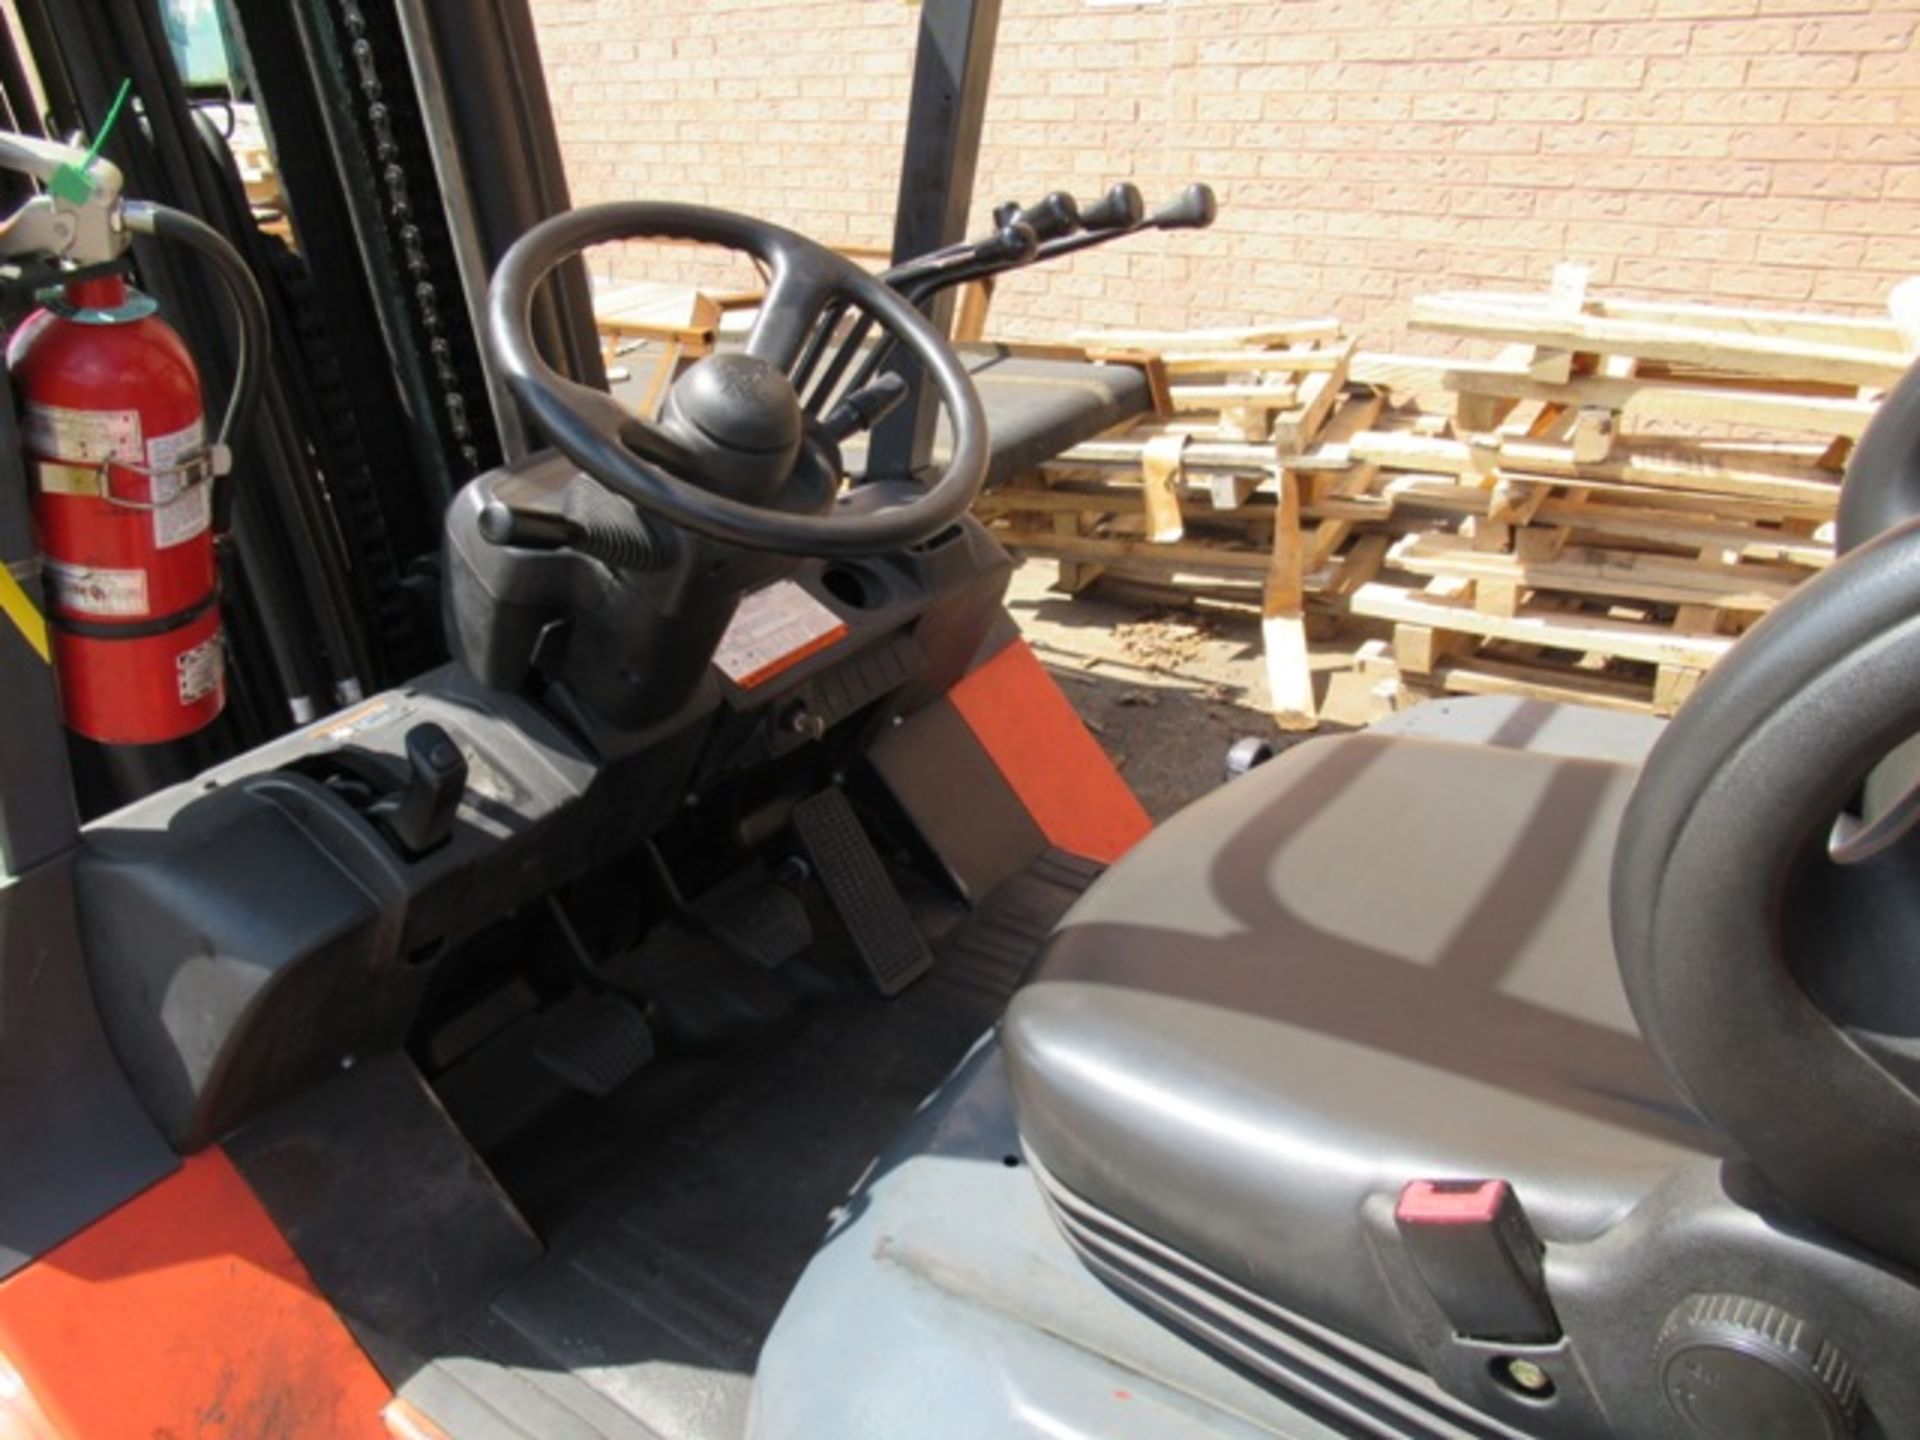 TOYOTA 7F9CU70 PROPANE FORKLIFT, 11,800# CAP., 3 STAGE W/SIDE SHIFT, SN 61421, NO TANK - Image 2 of 3